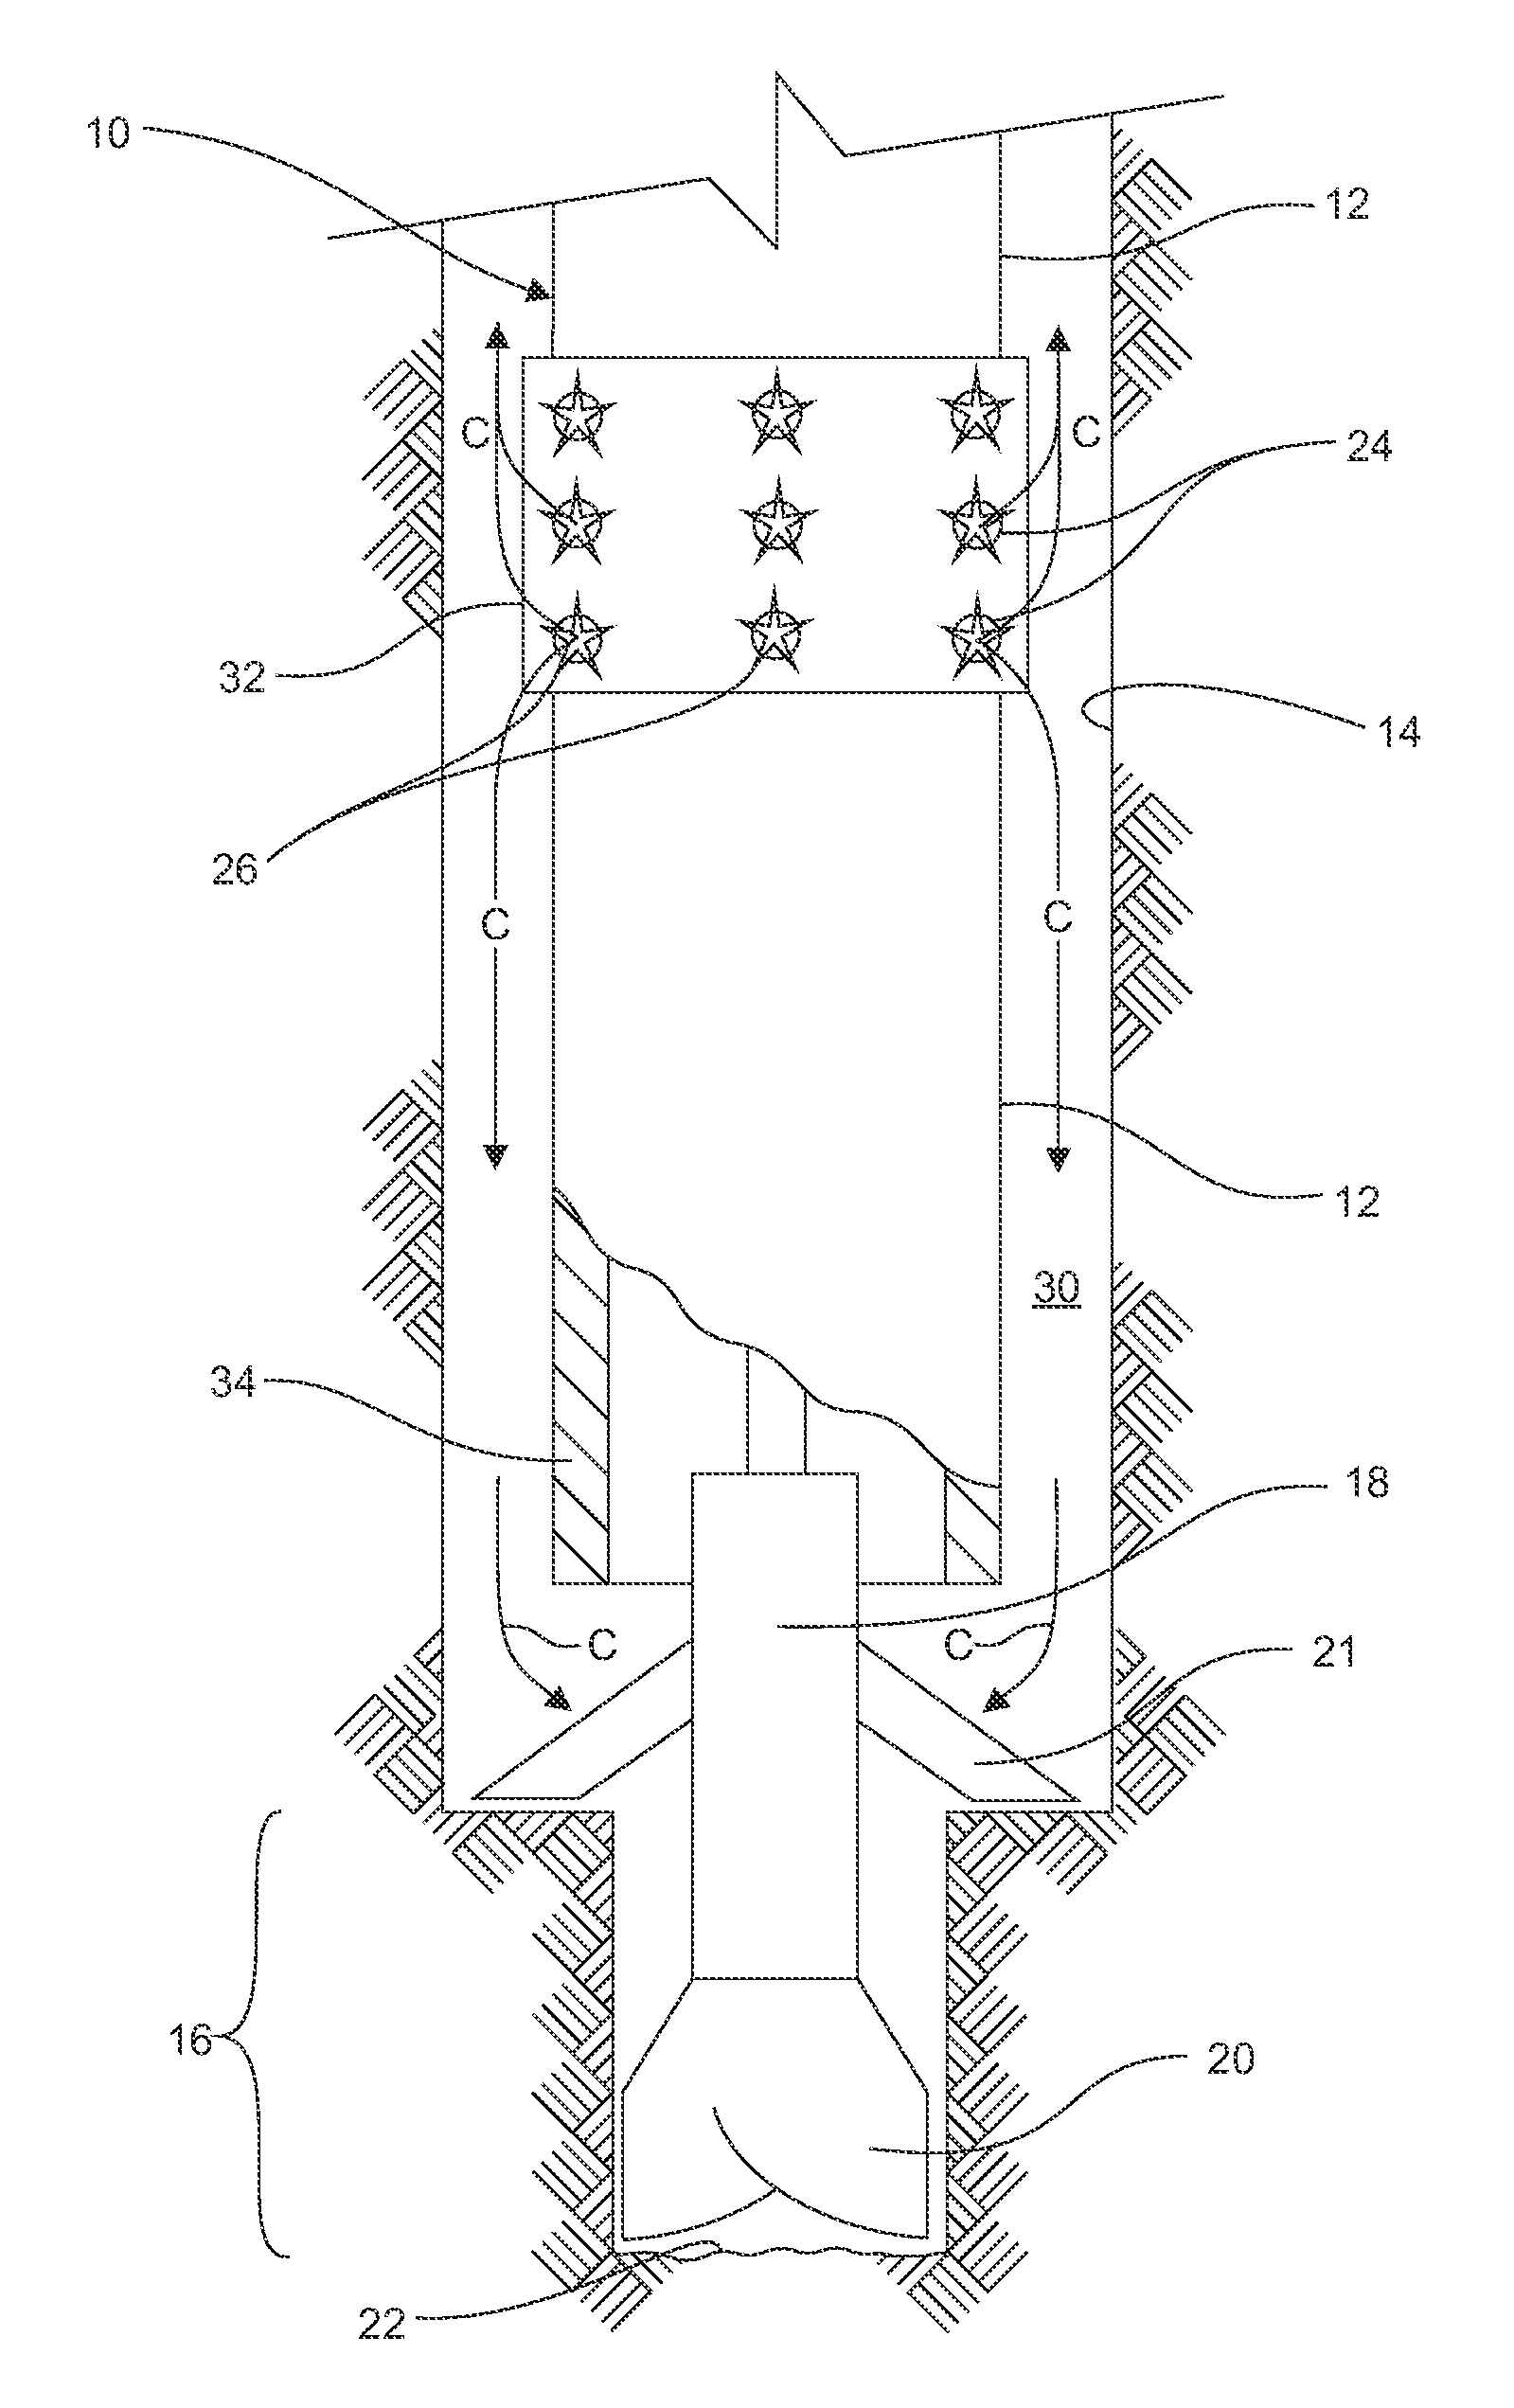 System for cementing tubulars comprising a mud motor